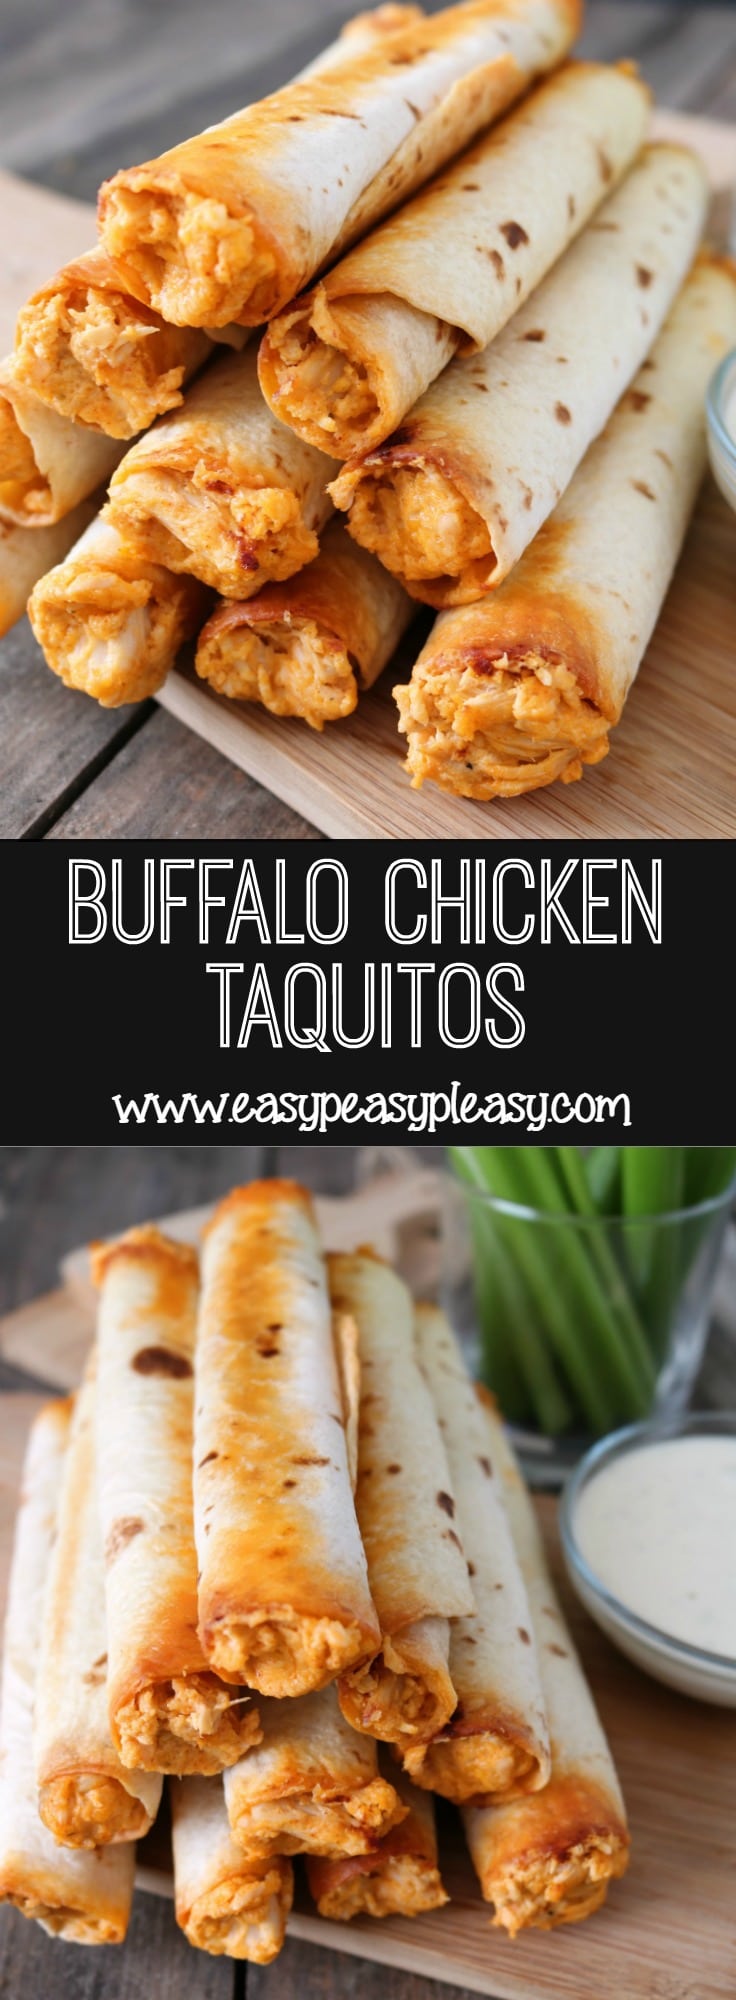 You will love these Buffalo Chicken Taquitos if you love Buffalo Chicken Dip. Its the perfect handheld appetizer or weeknight meal.